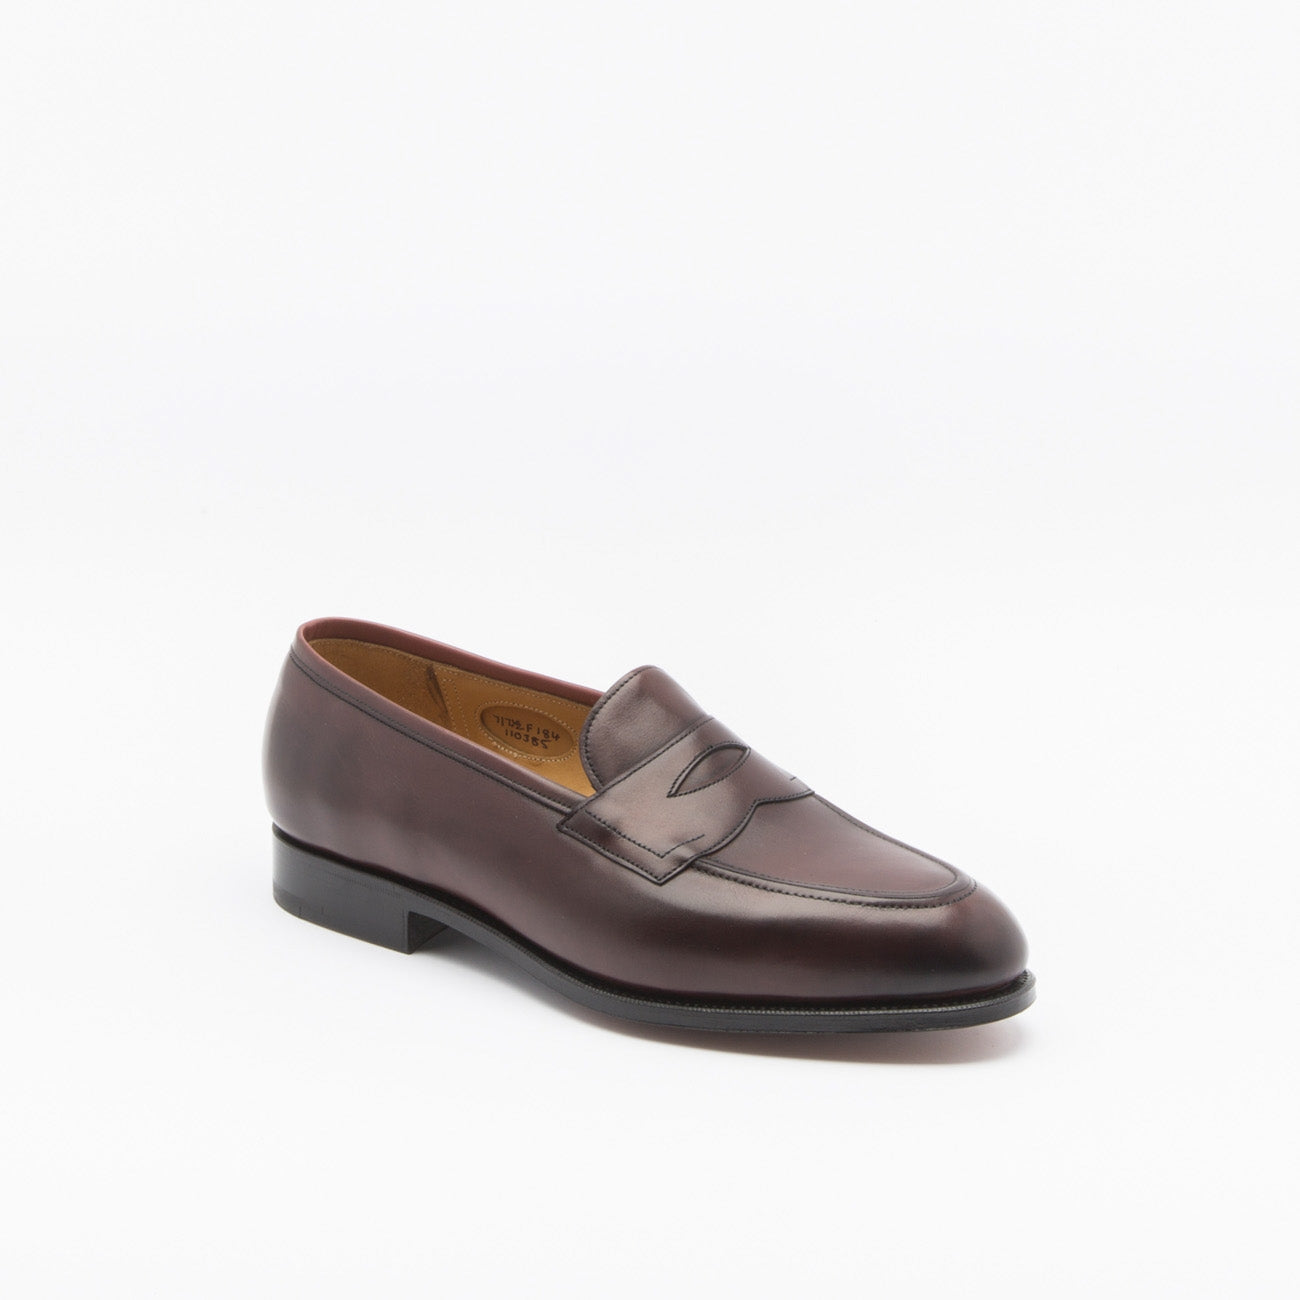 Edward Green Piccadilly burgundy antique calf penny loafer